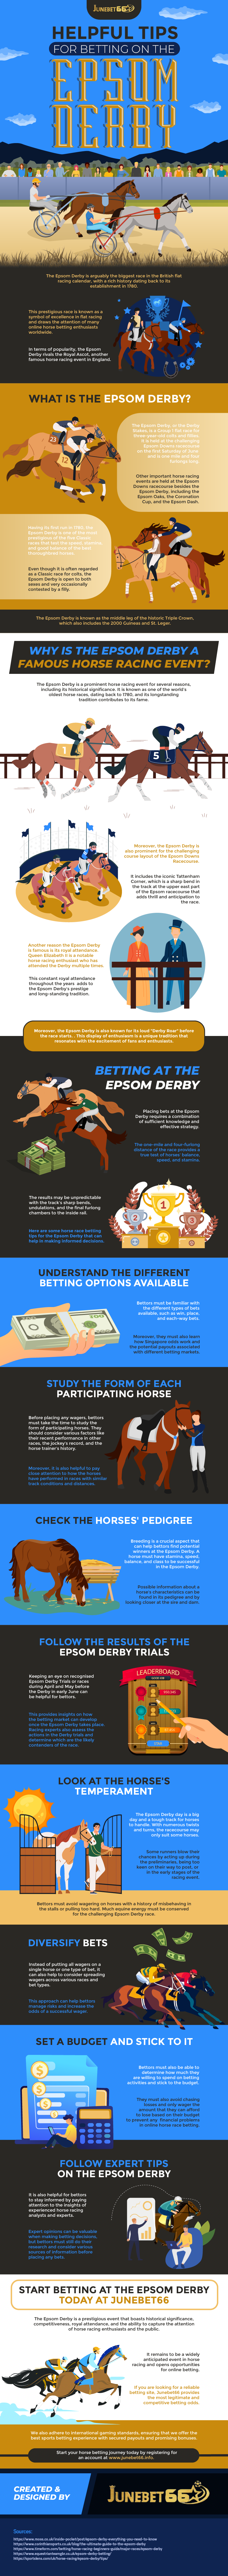 Helpful Tips for Betting on the Epsom Derby Infographic Image